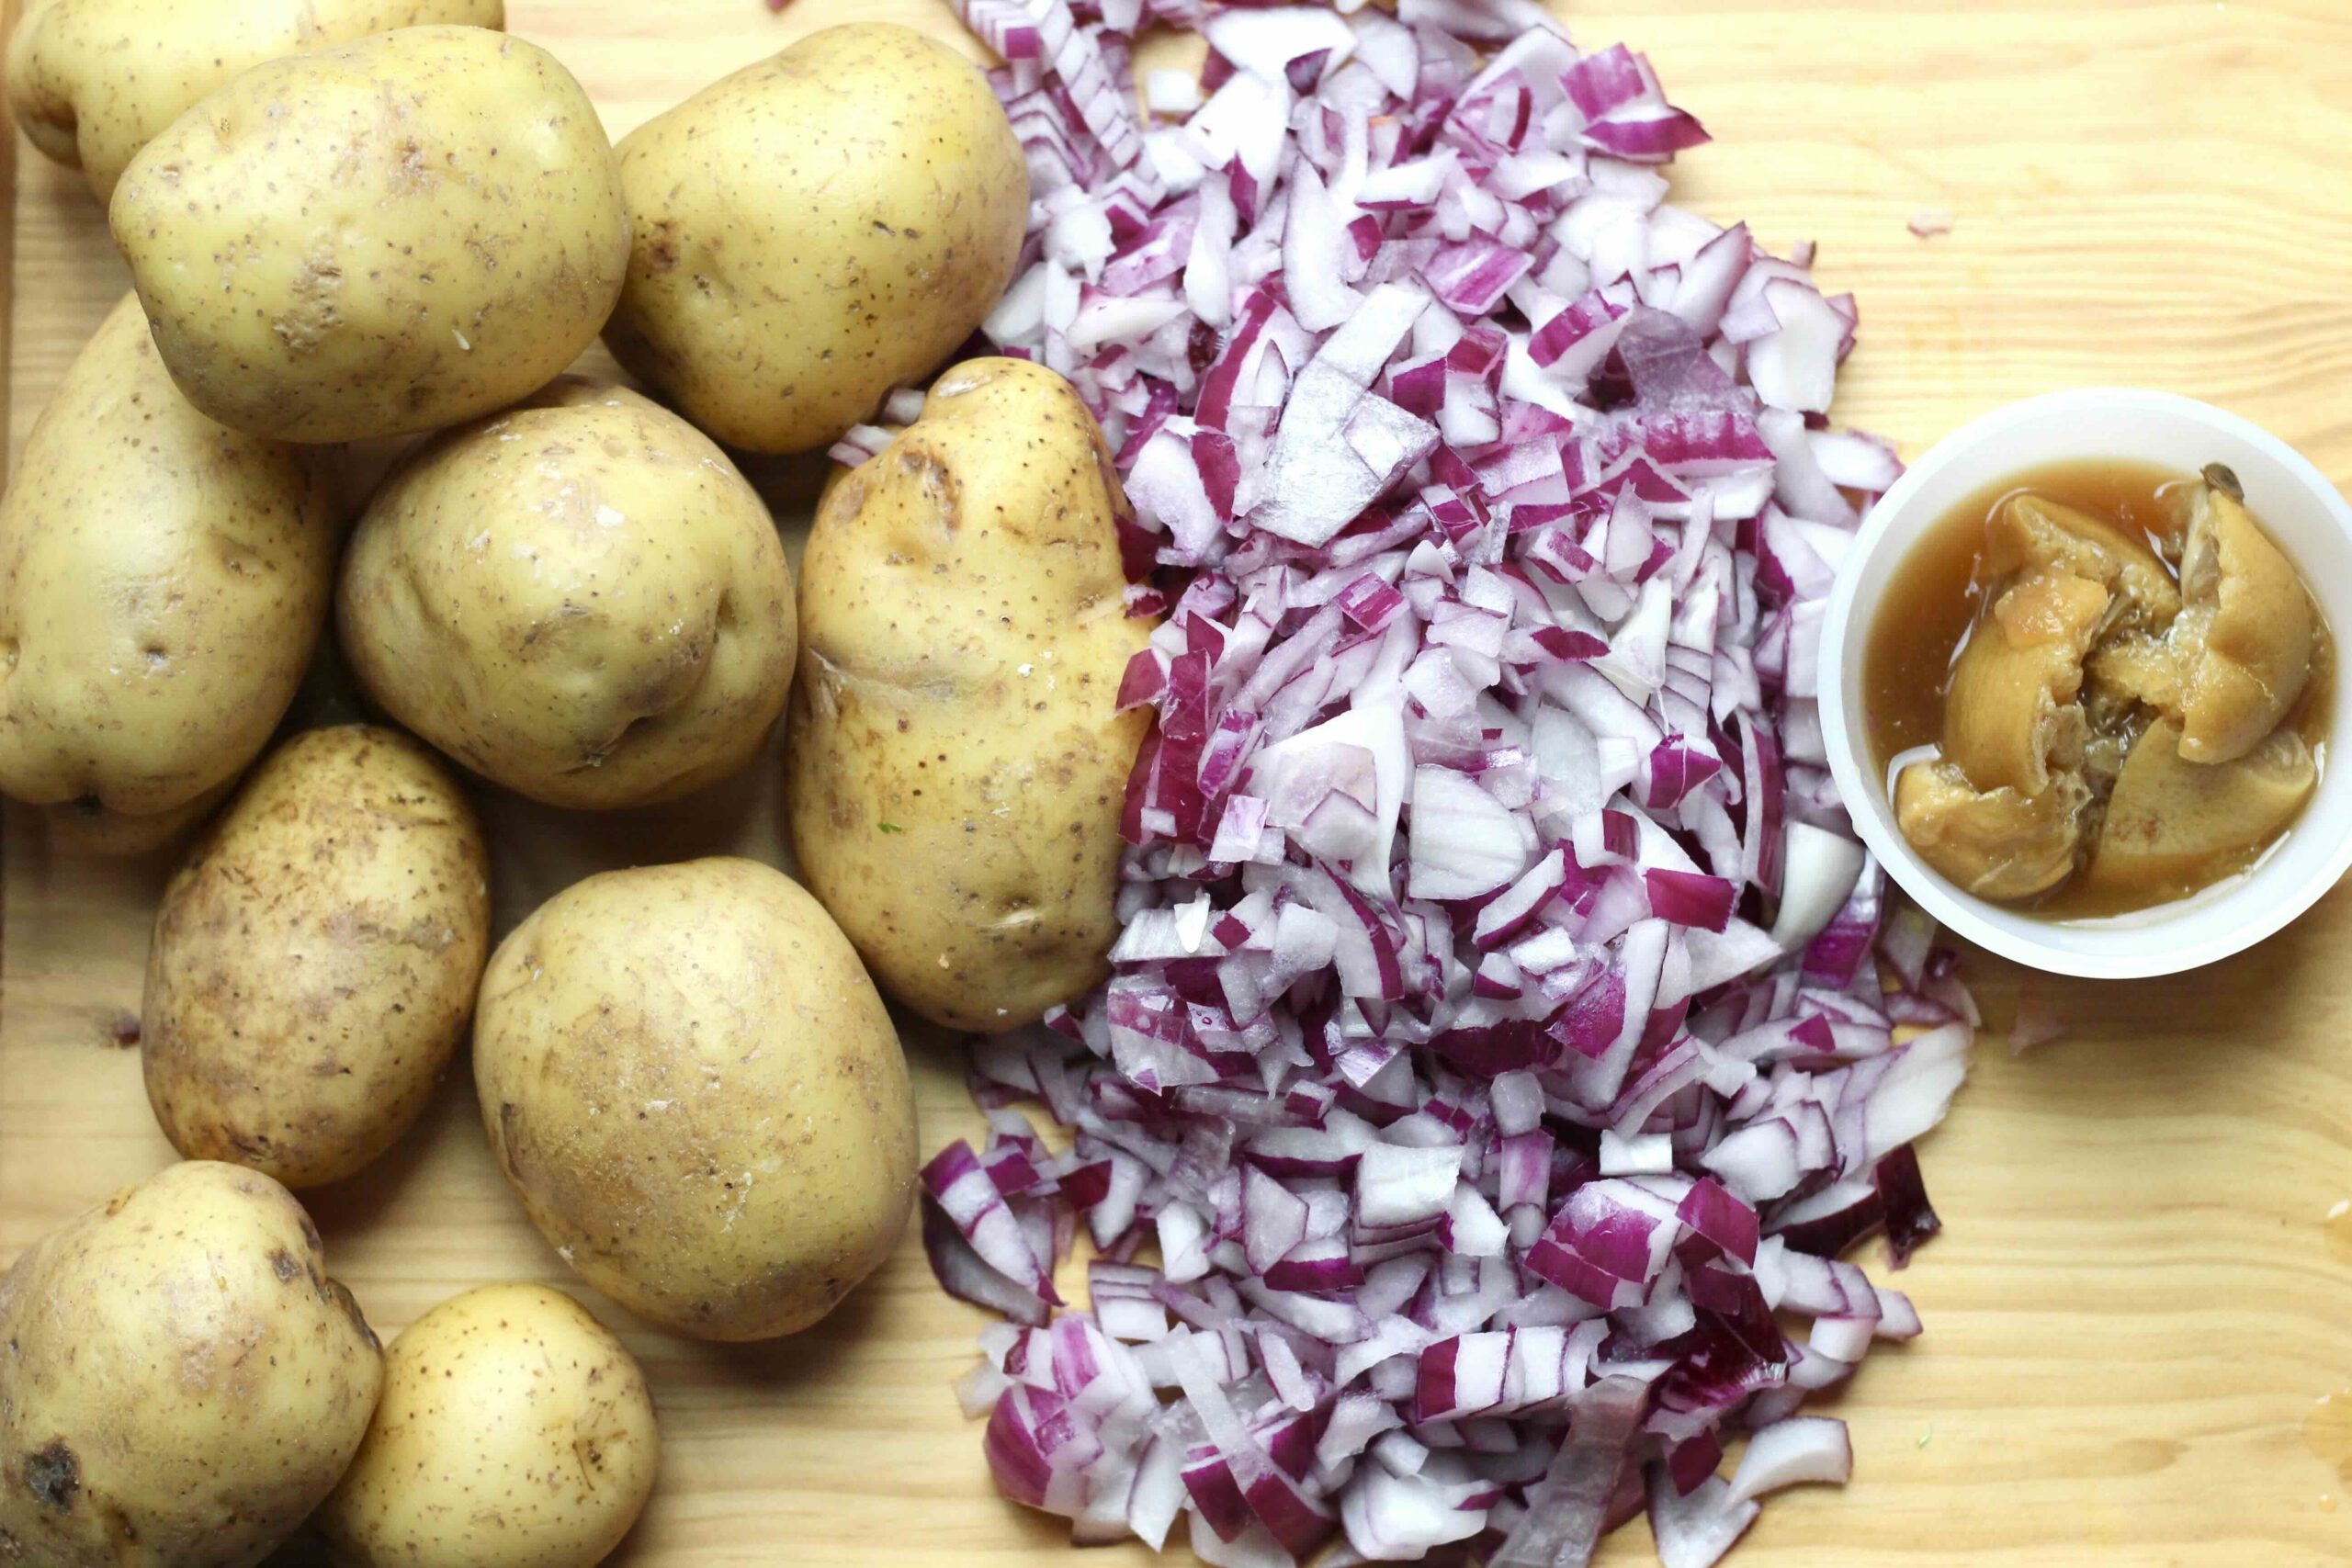 Yellow Potatoes, chopped red onions, and preserved lemons